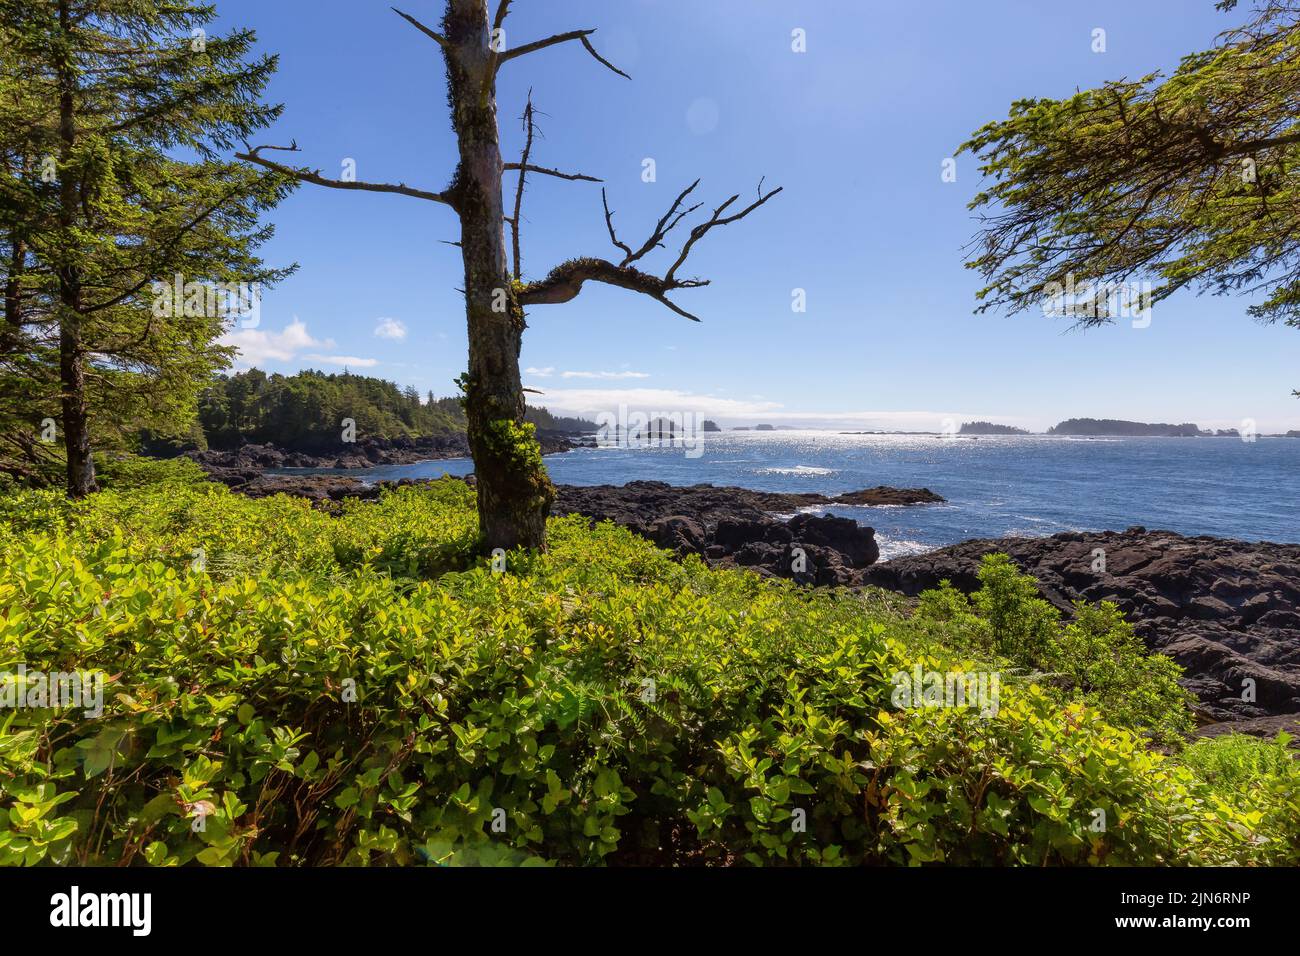 Lush green trees and bushes overlooking the Ocean in the Morning. Stock Photo